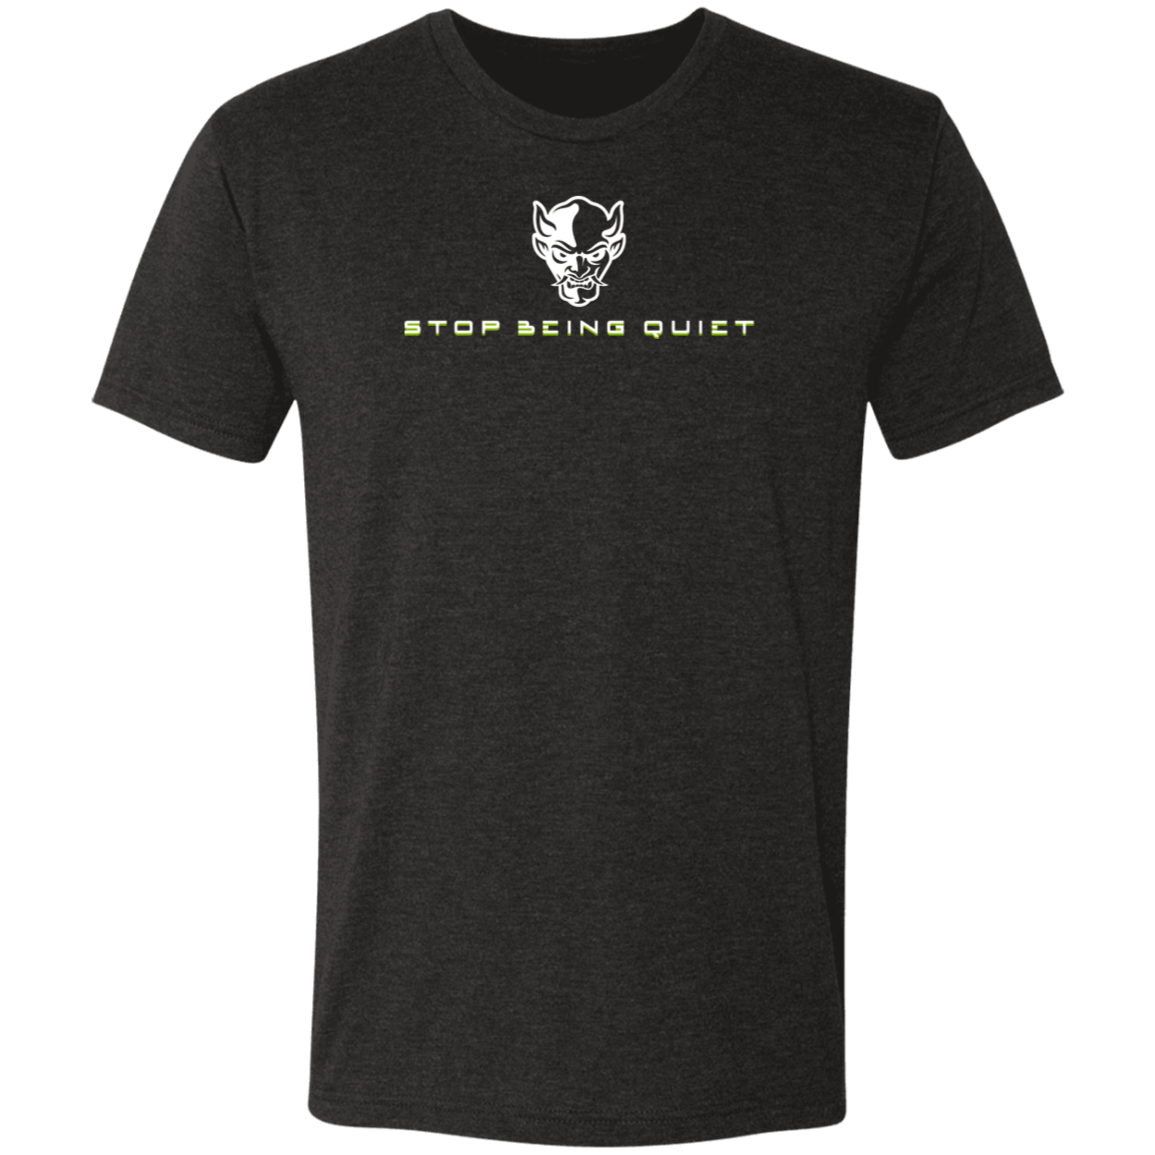 Stop Being Quiet Gym Tee - T-Shirts